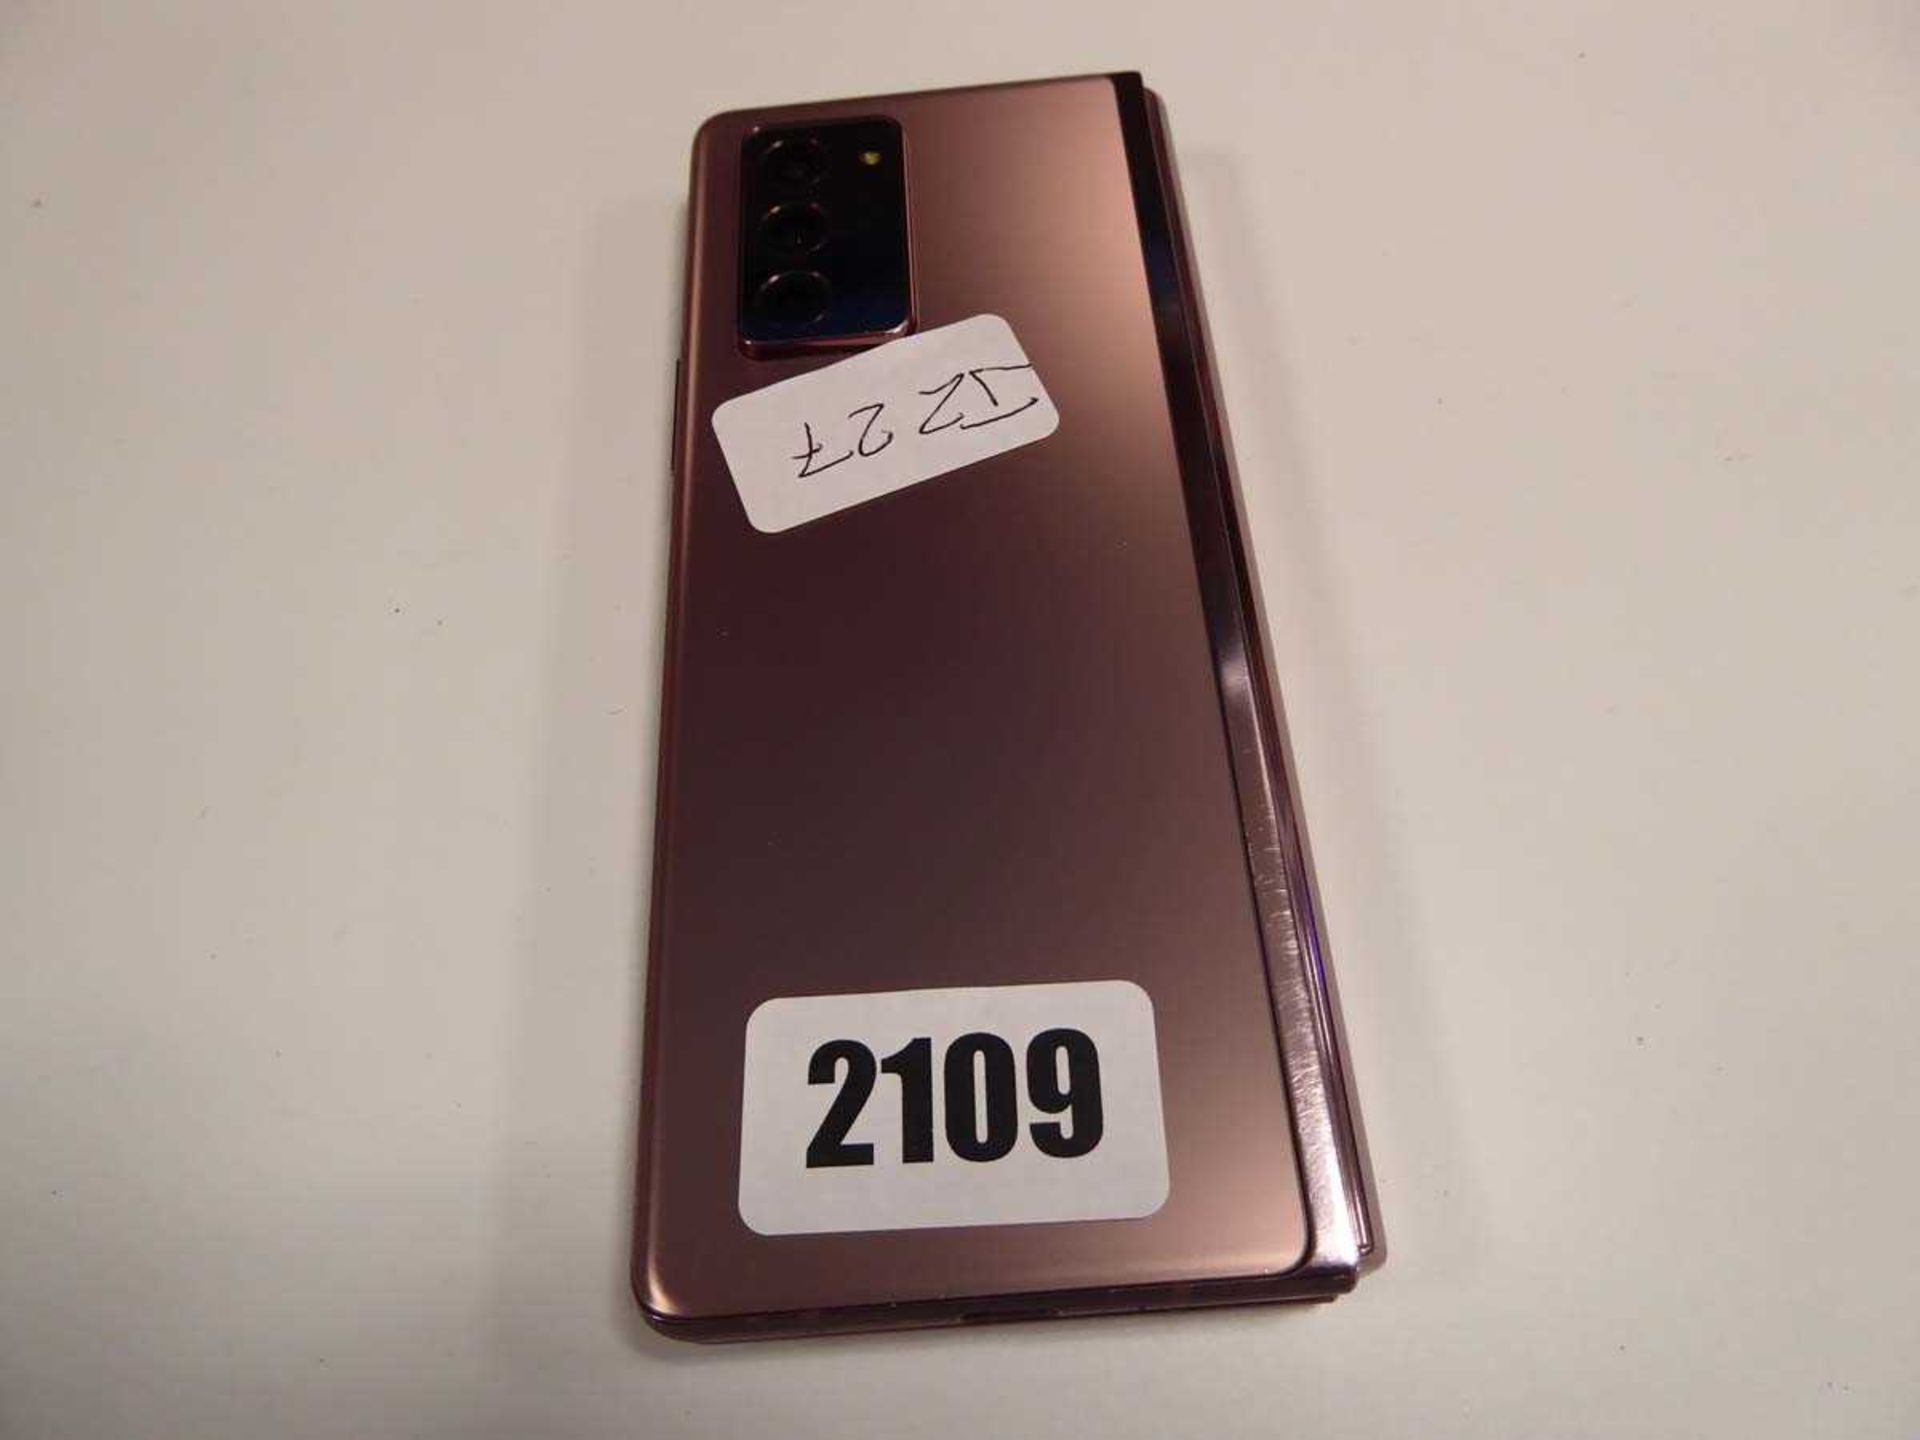 Samsung Galaxy Z Fold 2 5G mobile phone - Image 3 of 3